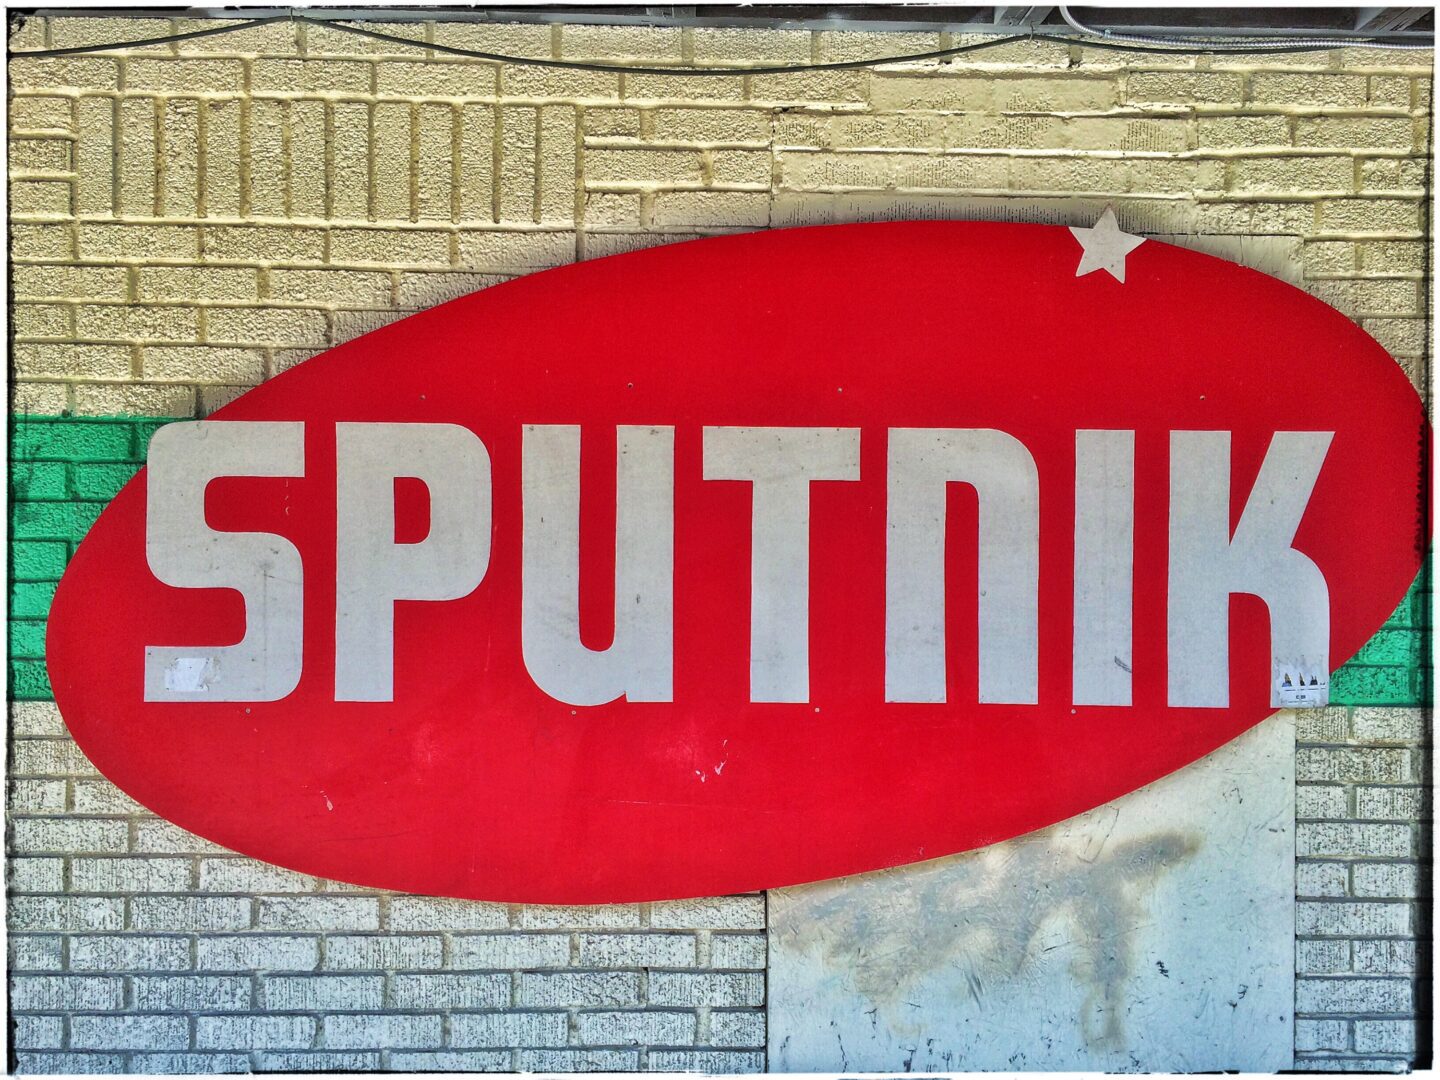 A sign that says sputnik on the side of a brick building.